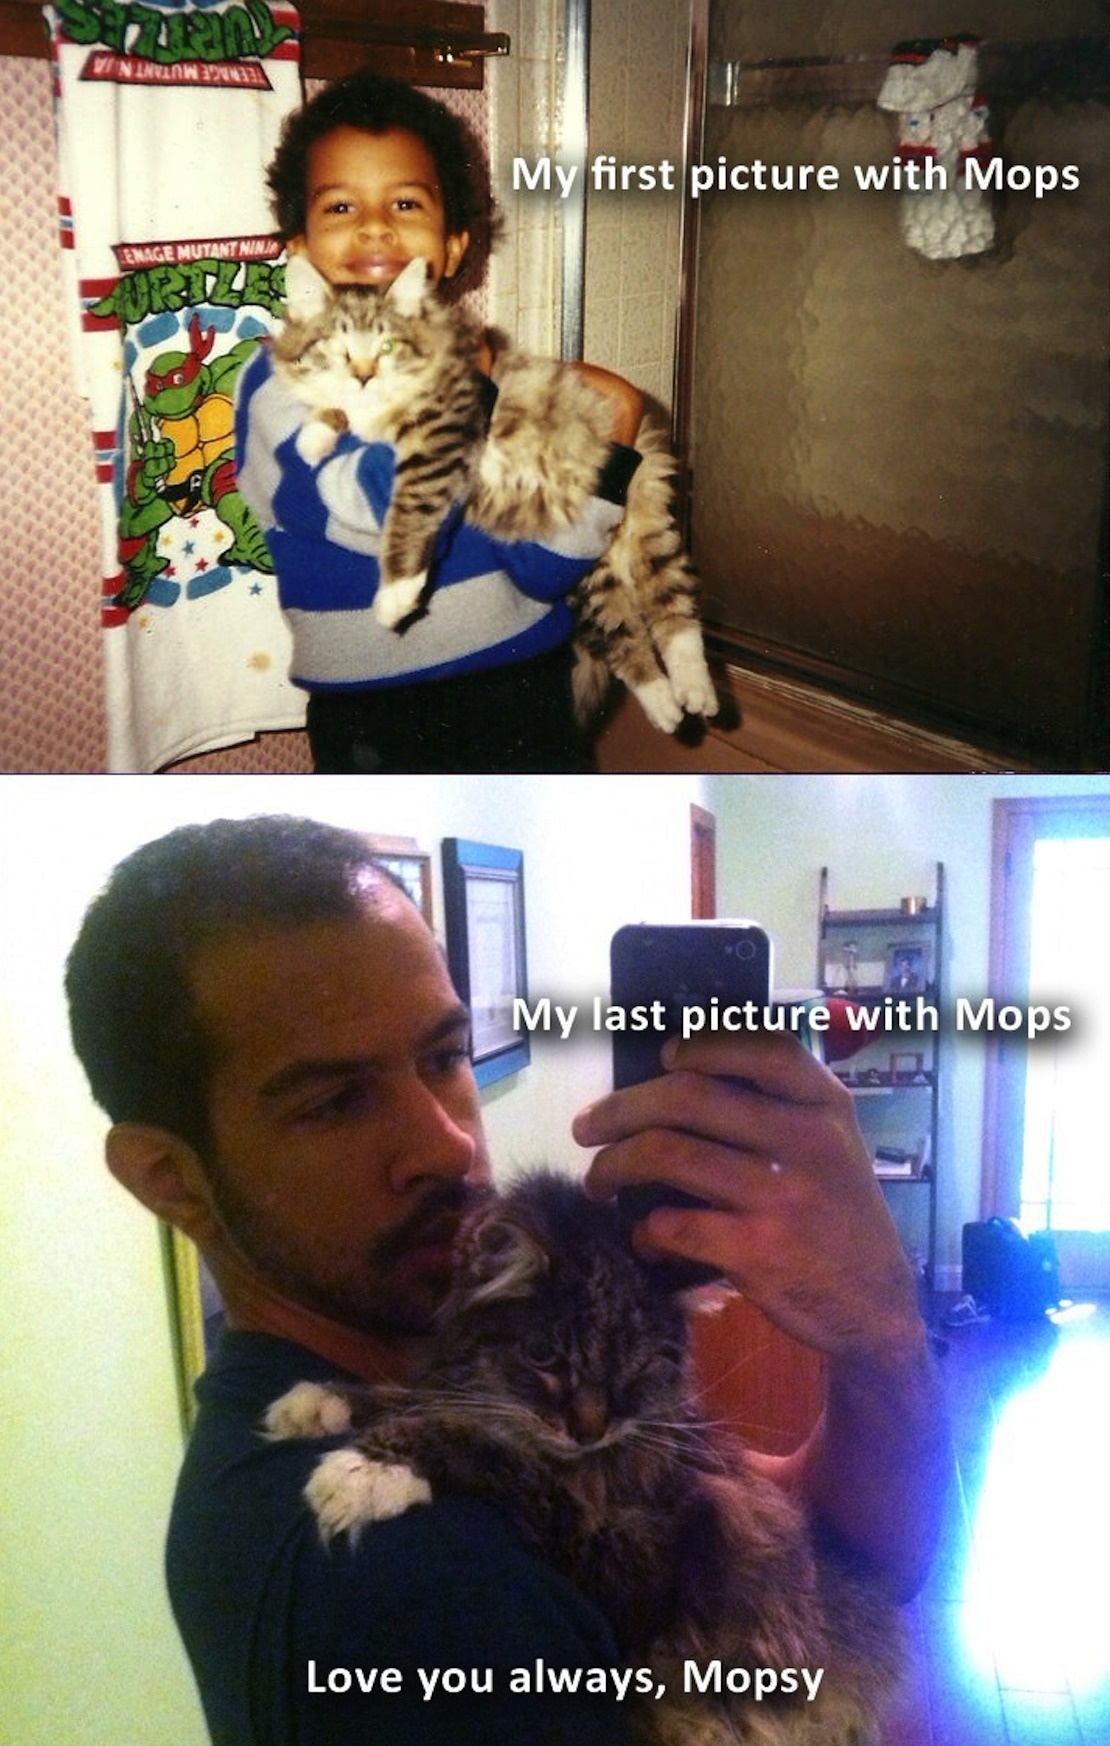 "my first and last picture with Mopsy"